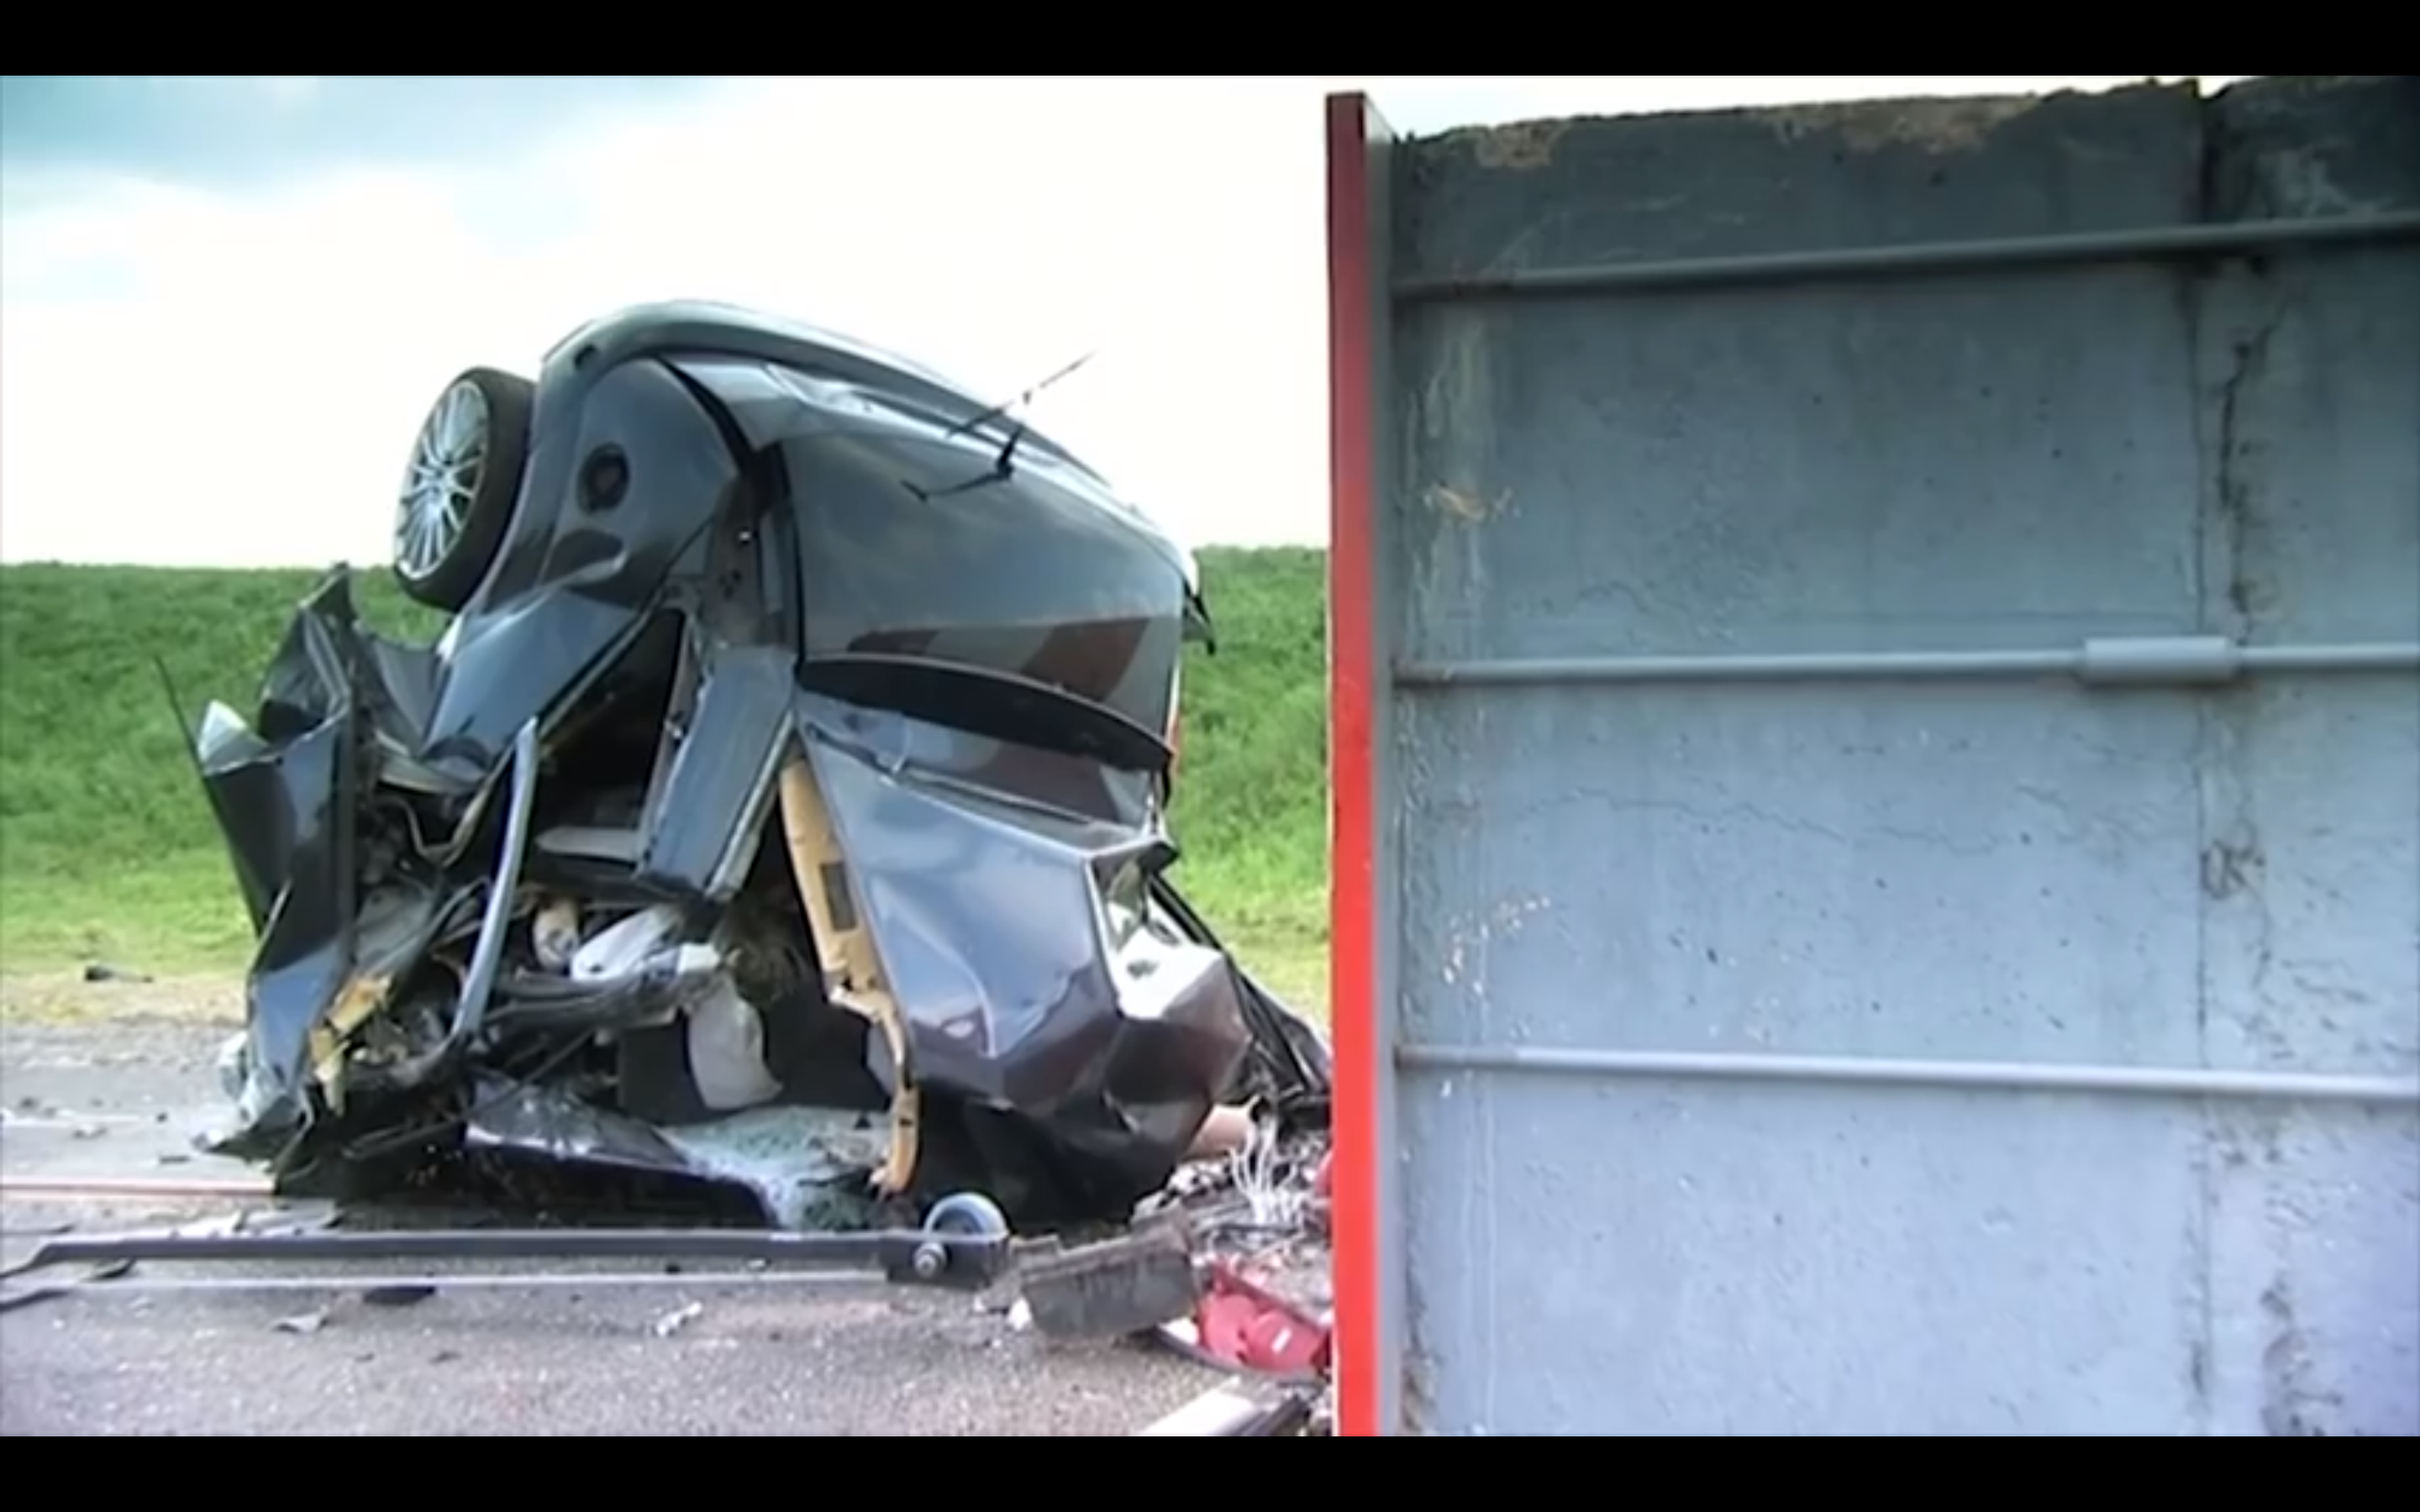 Watch What Happens When A Car Hits A Wall At 1 Mph